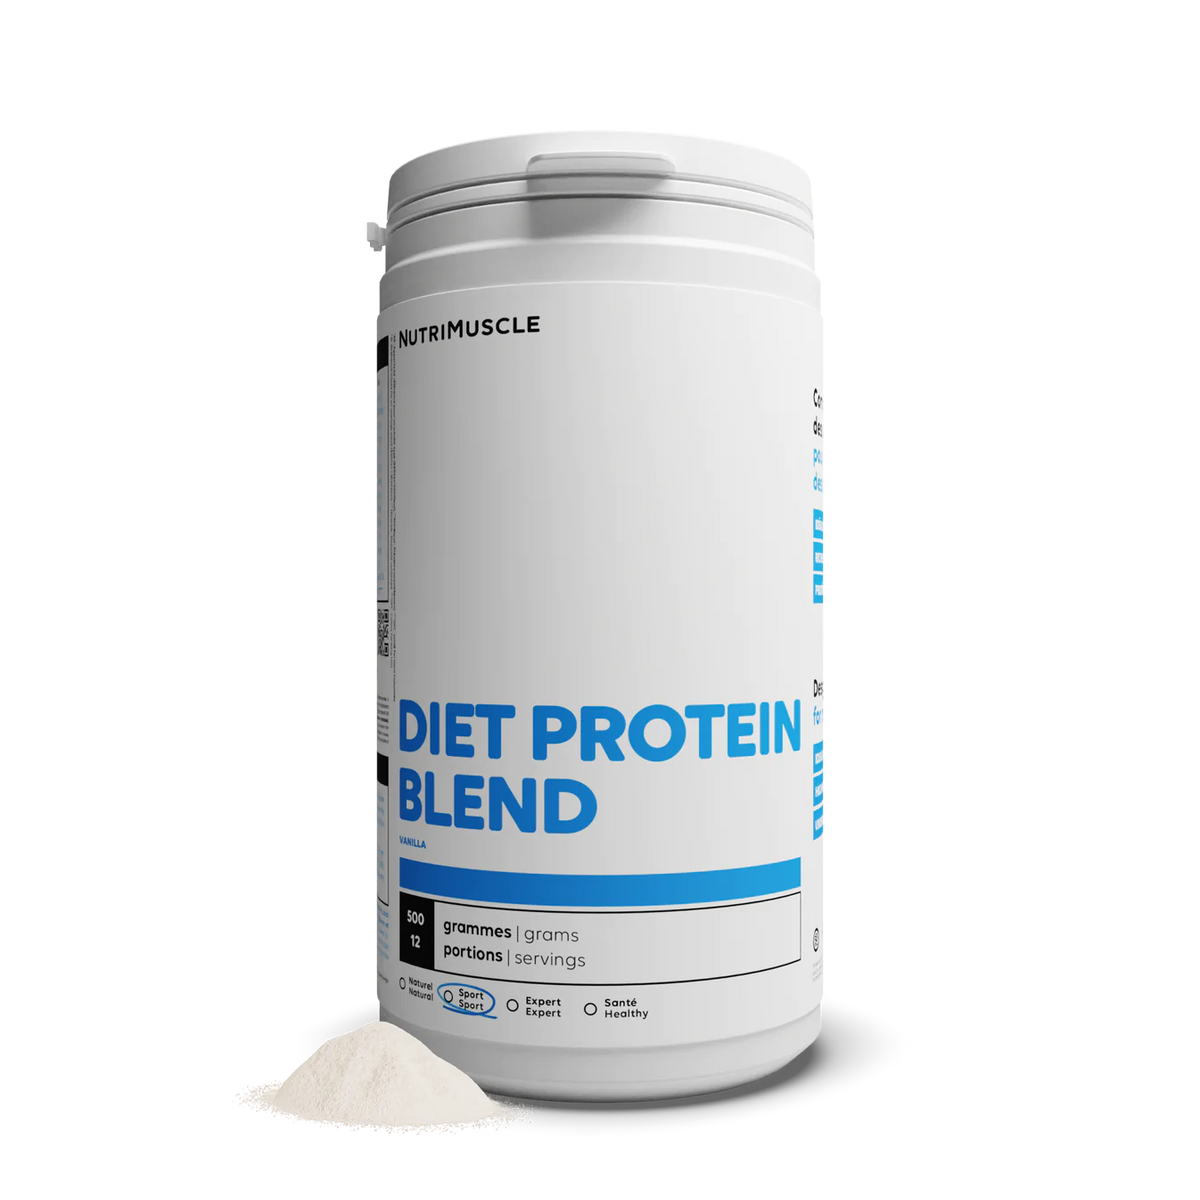 Nutrimuscle - Diet Protein Blend